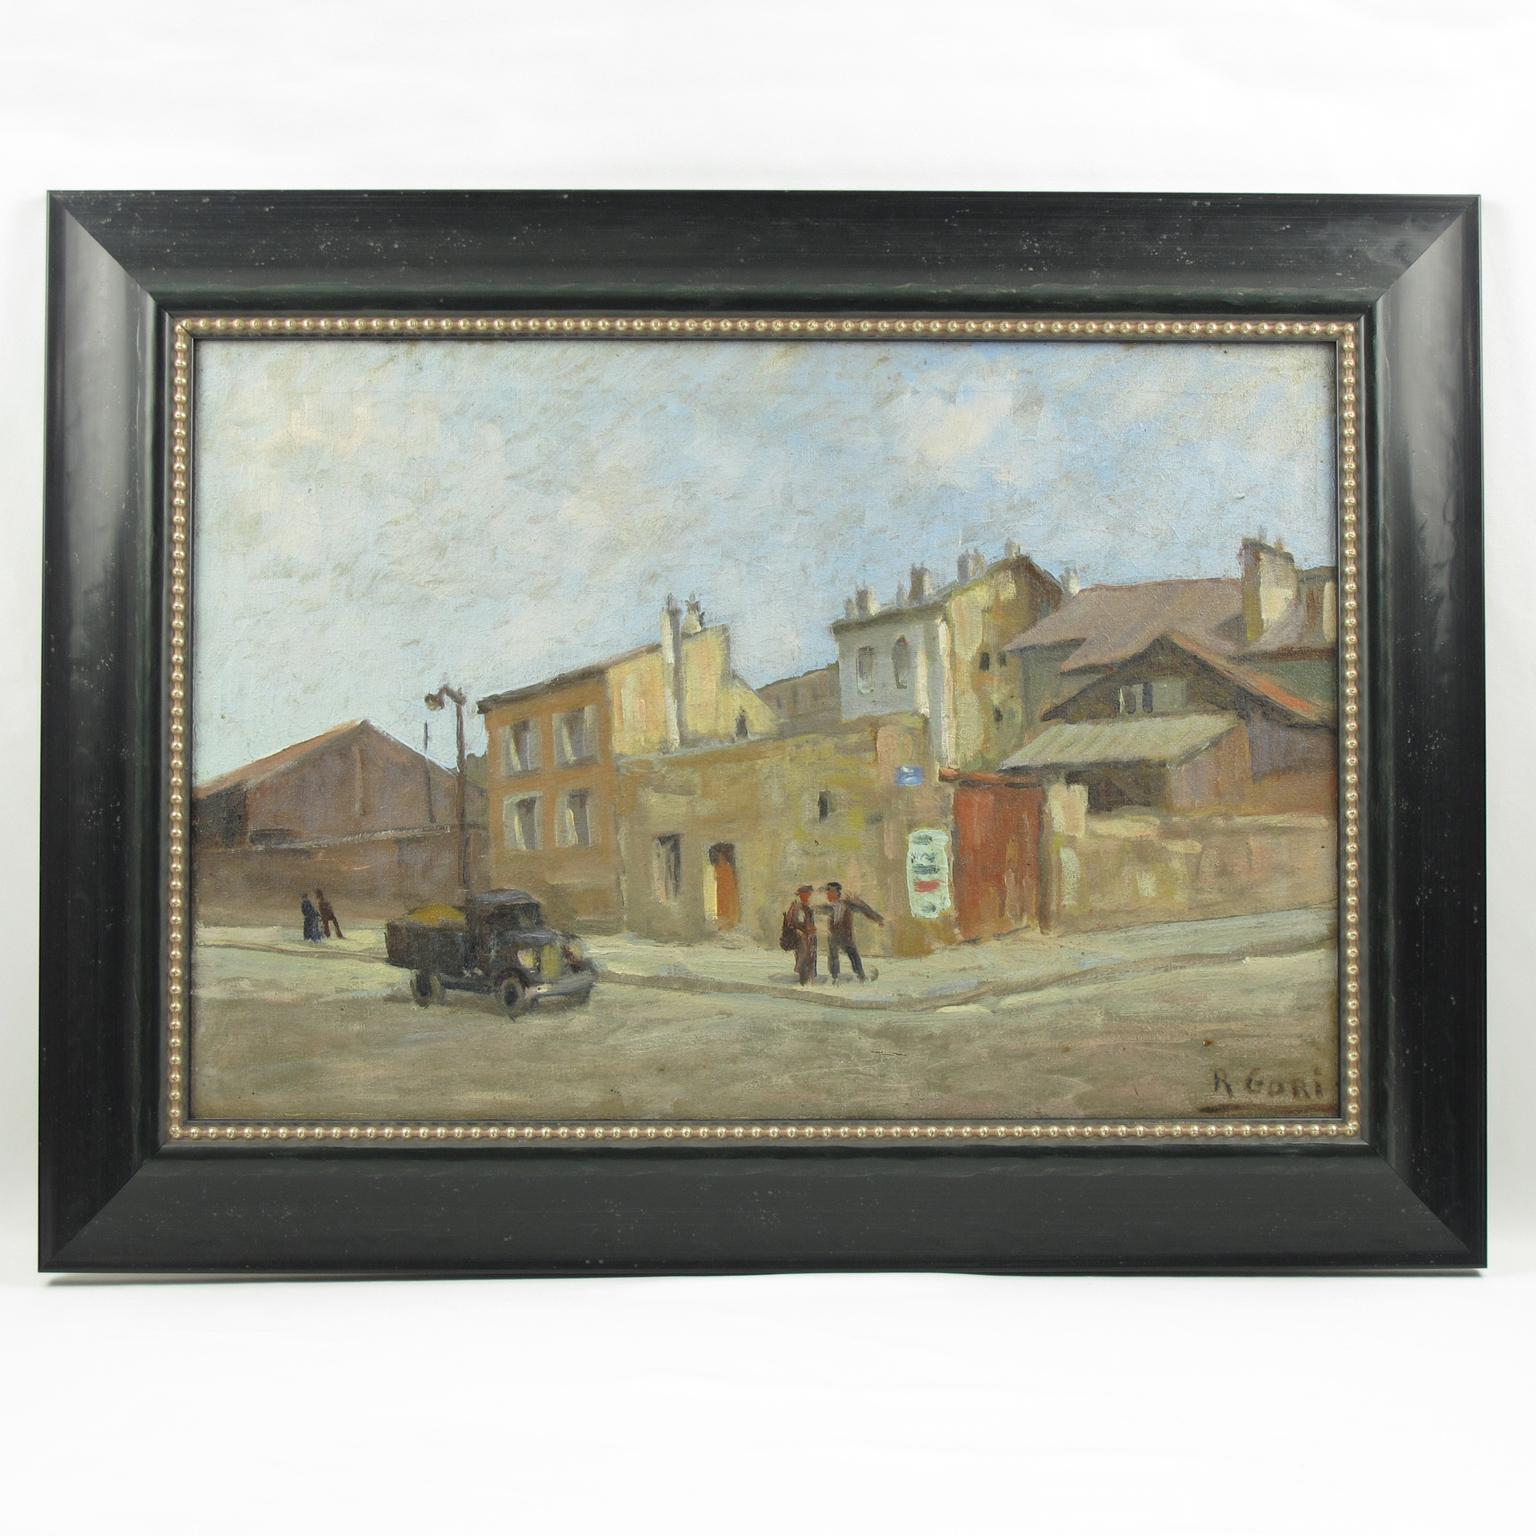 Oil on canvas painting signed by Renzo Gori (1911-1998), featuring an urban street scene probably in France, signed bottom right corner.
Contemporary framed in an elegant black wood textured pattern frame with gilded